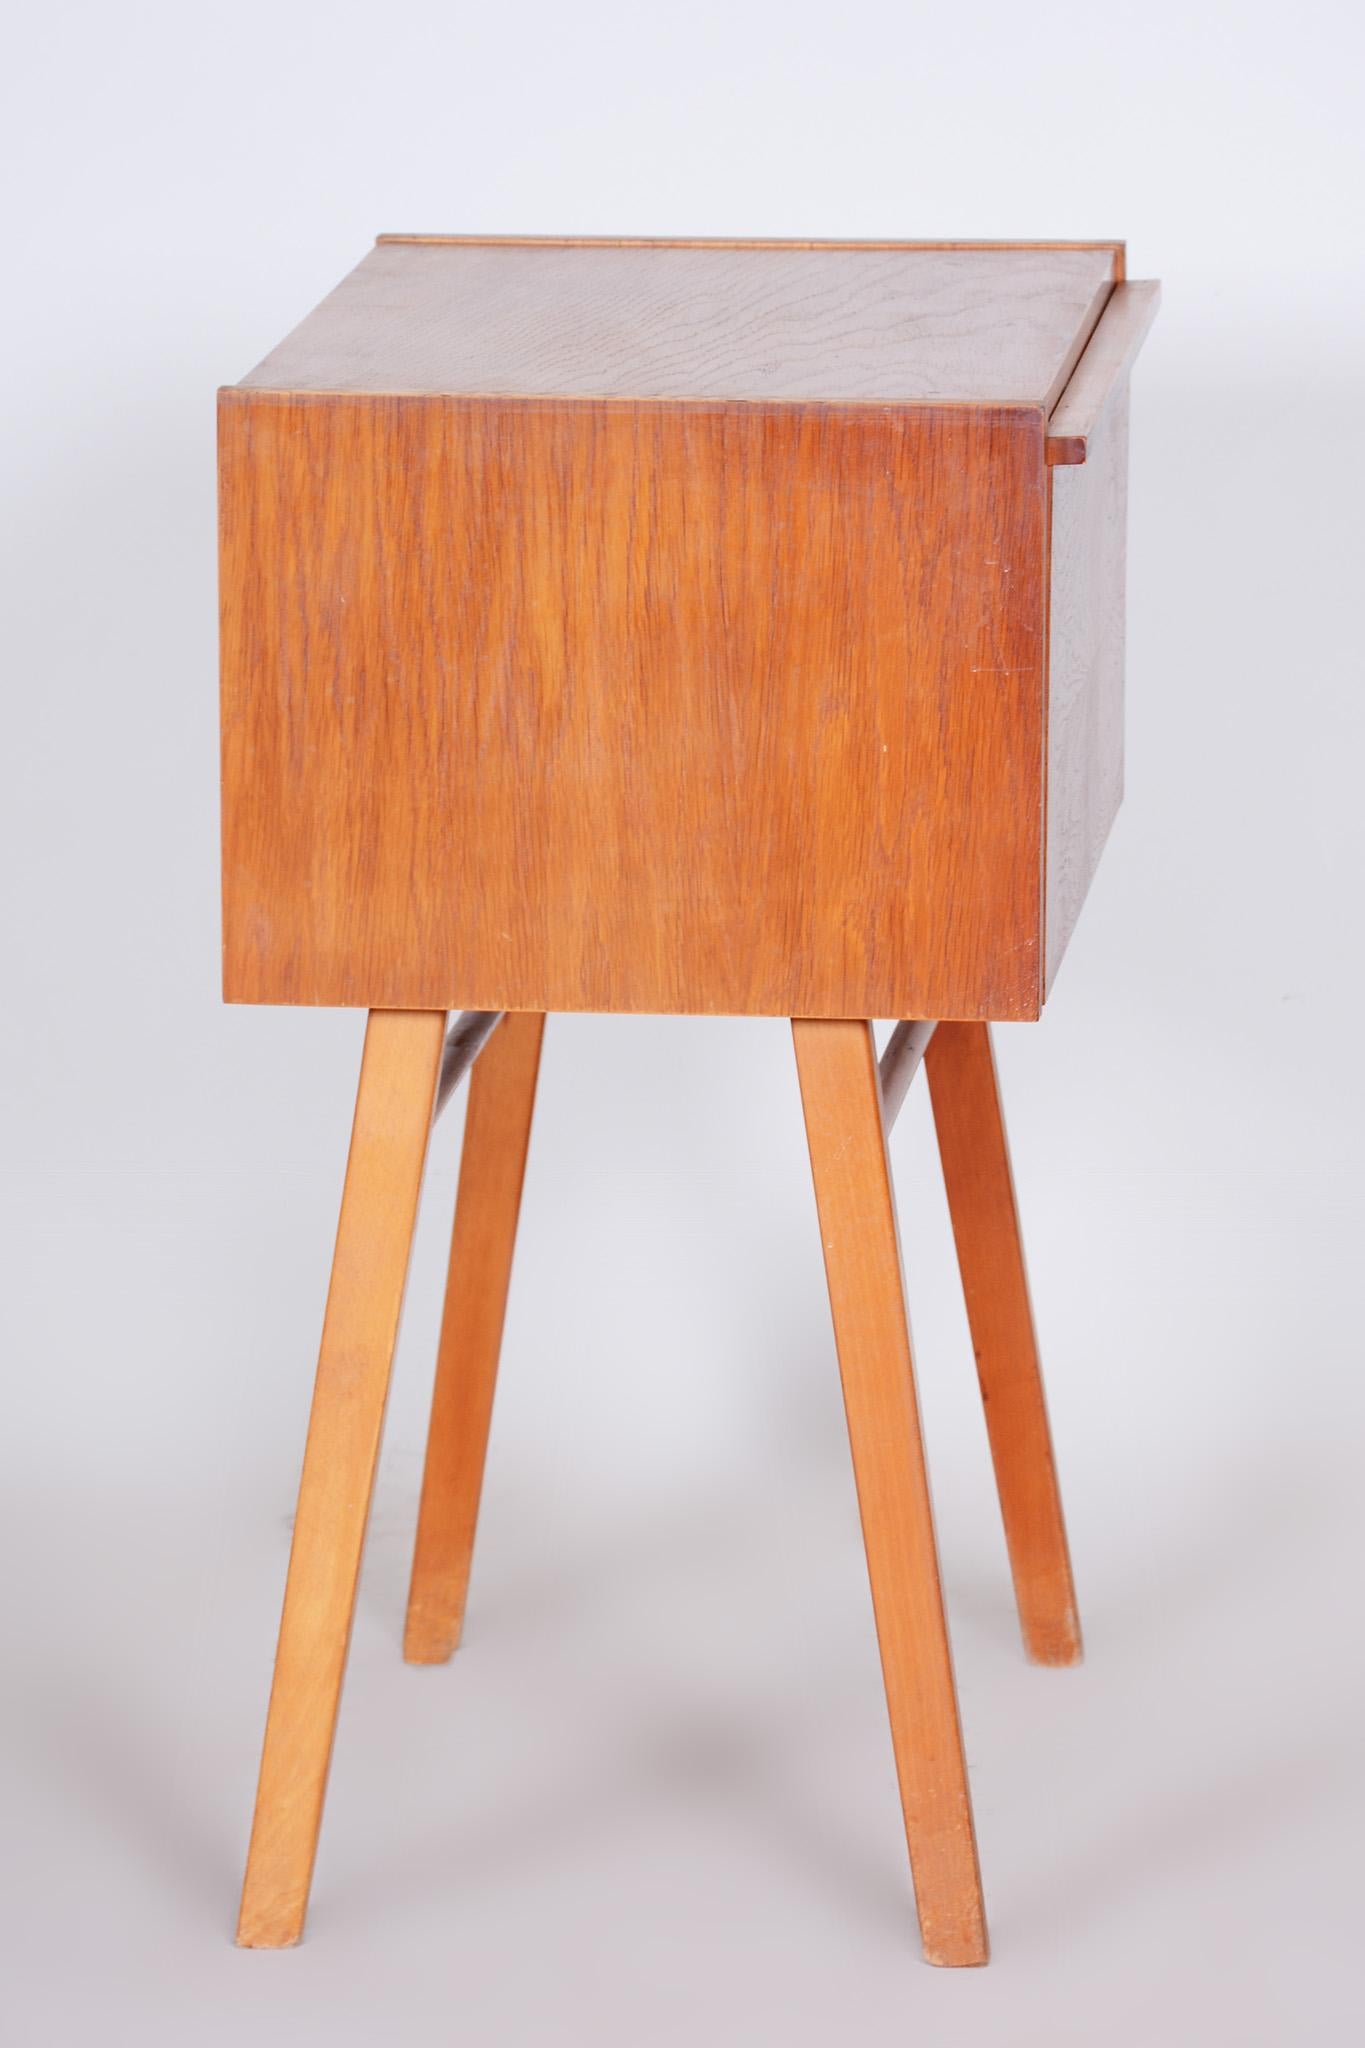 Czech Mid-Century Side Table, Cabinet Made Out of Oak, 1950s, Refreshed Polish For Sale 2